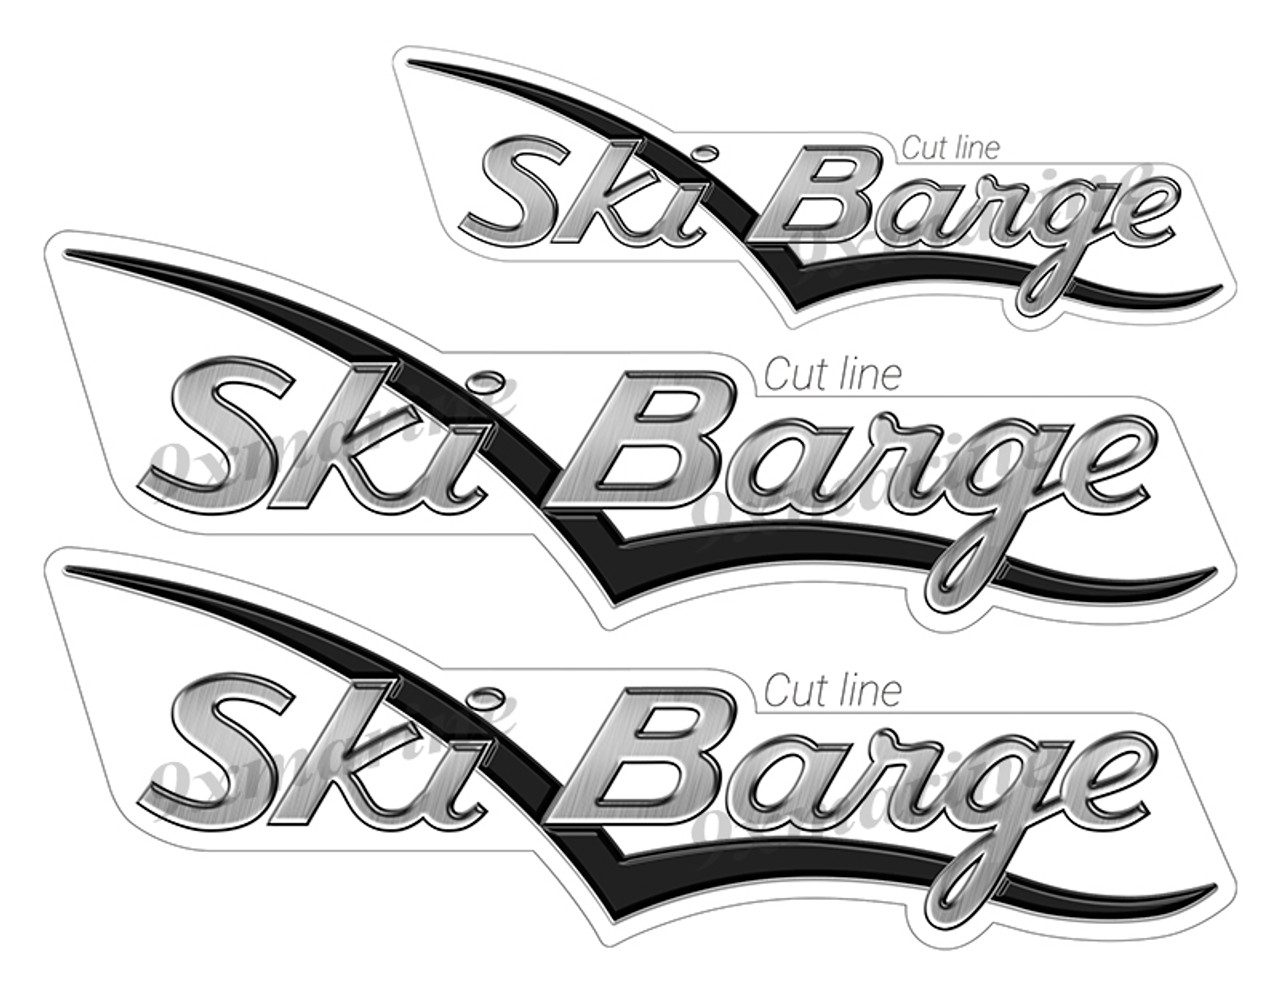 Ski Barge boat stickers. Replace your boat maker stickers